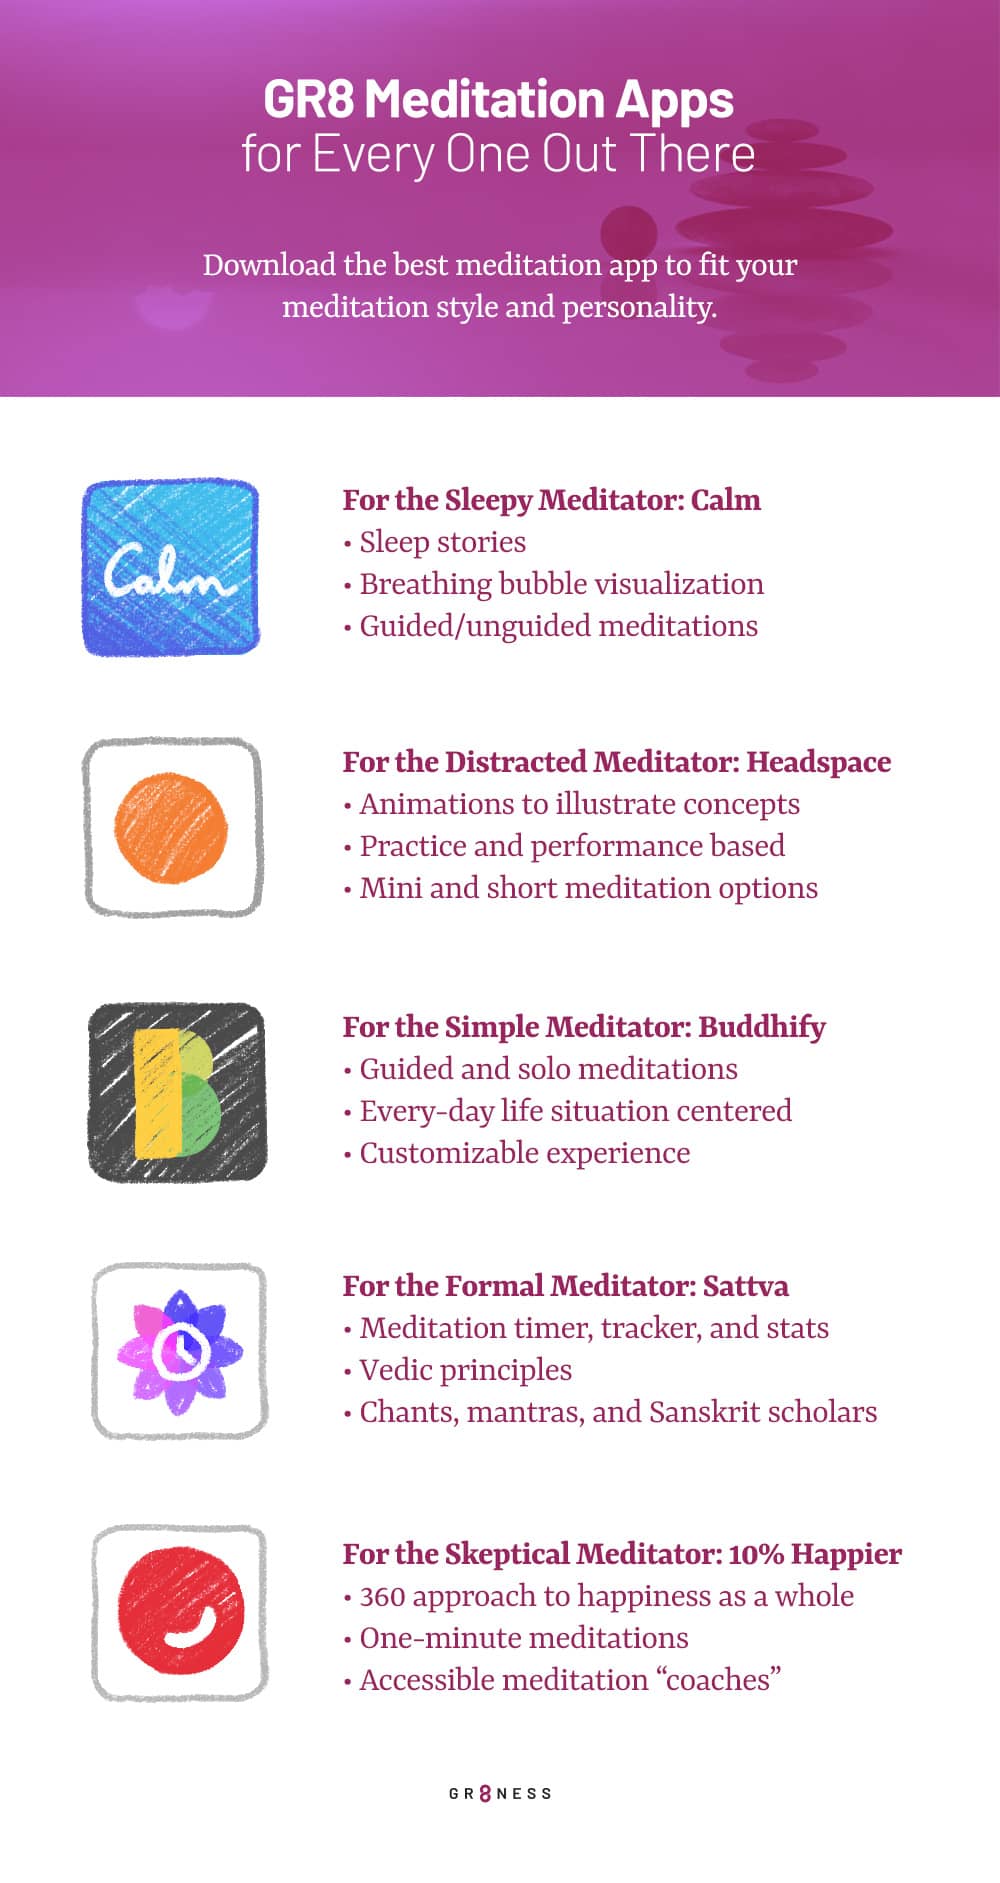 List of recommended meditation apps to download